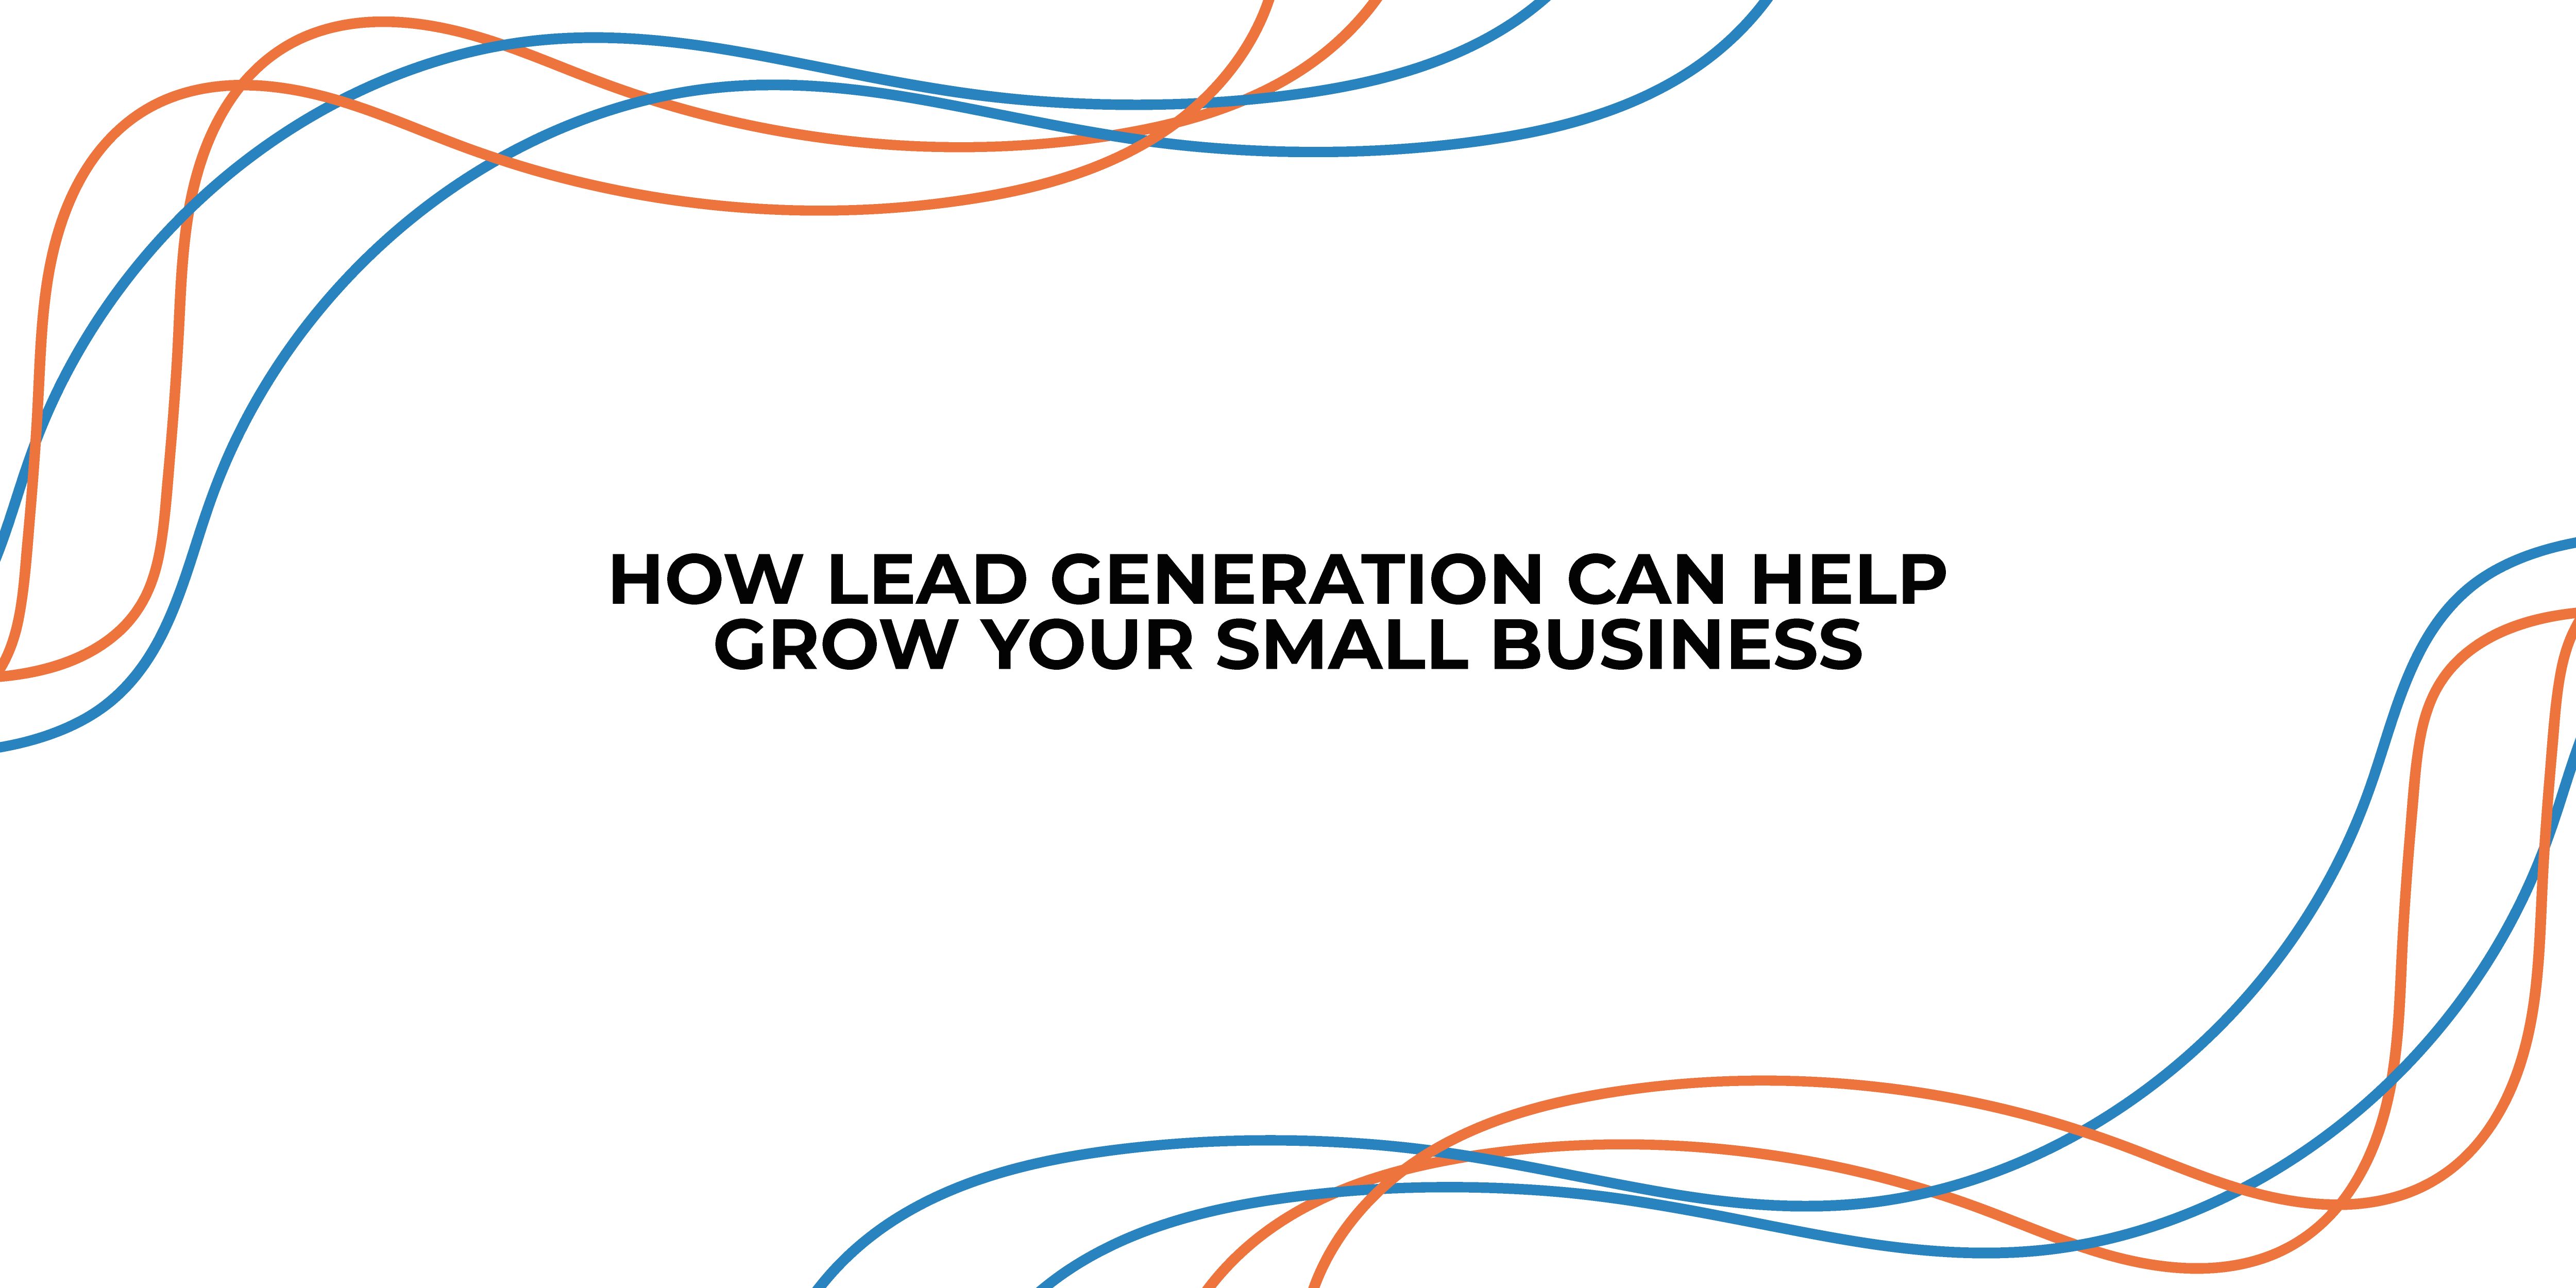 How Lead Generation Can Help Grow Your Small Business